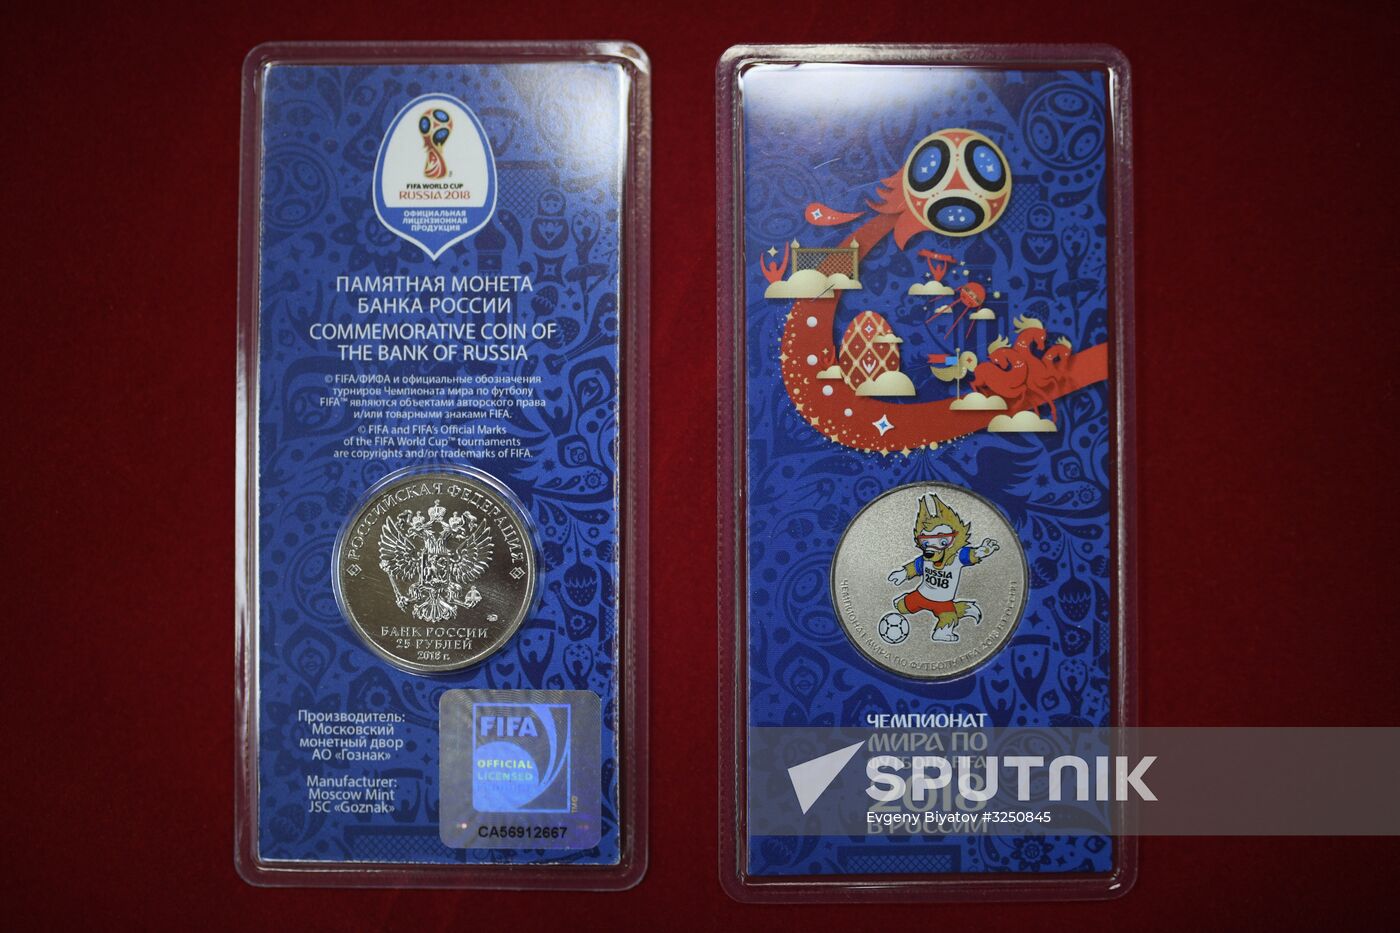 Presentation of 2018 FIFA World Cup commemorative coins